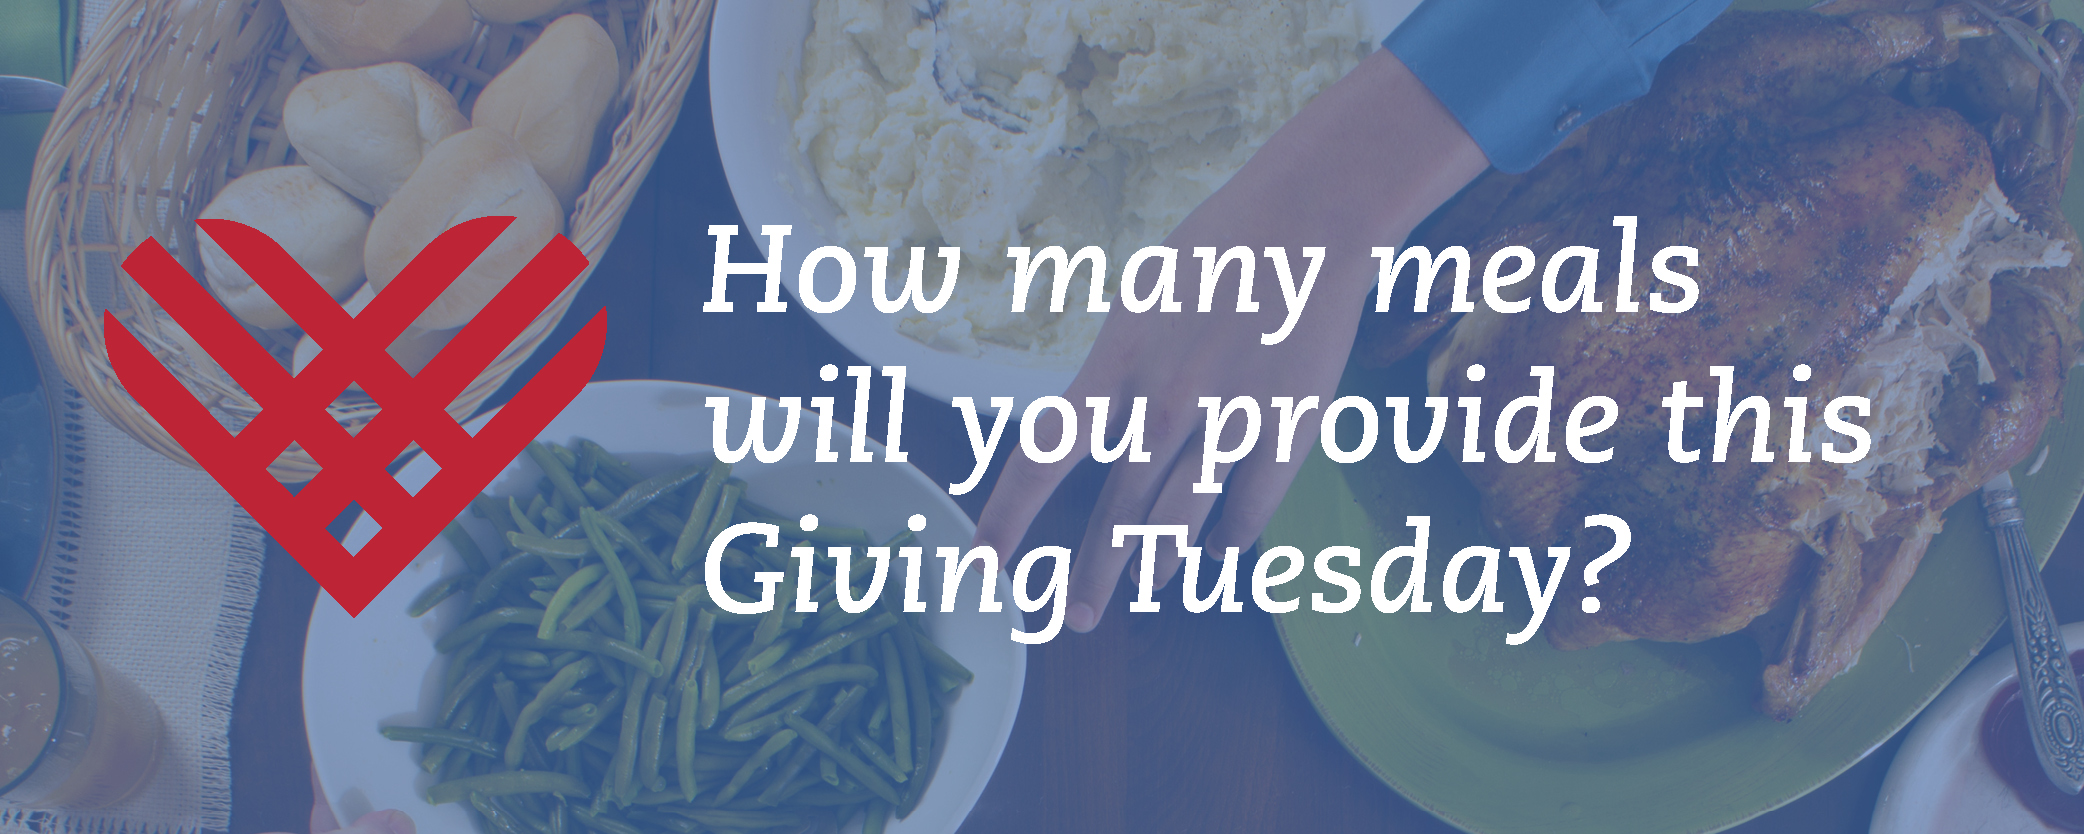 COM_GivingTuesday_Email Banners7.jpg